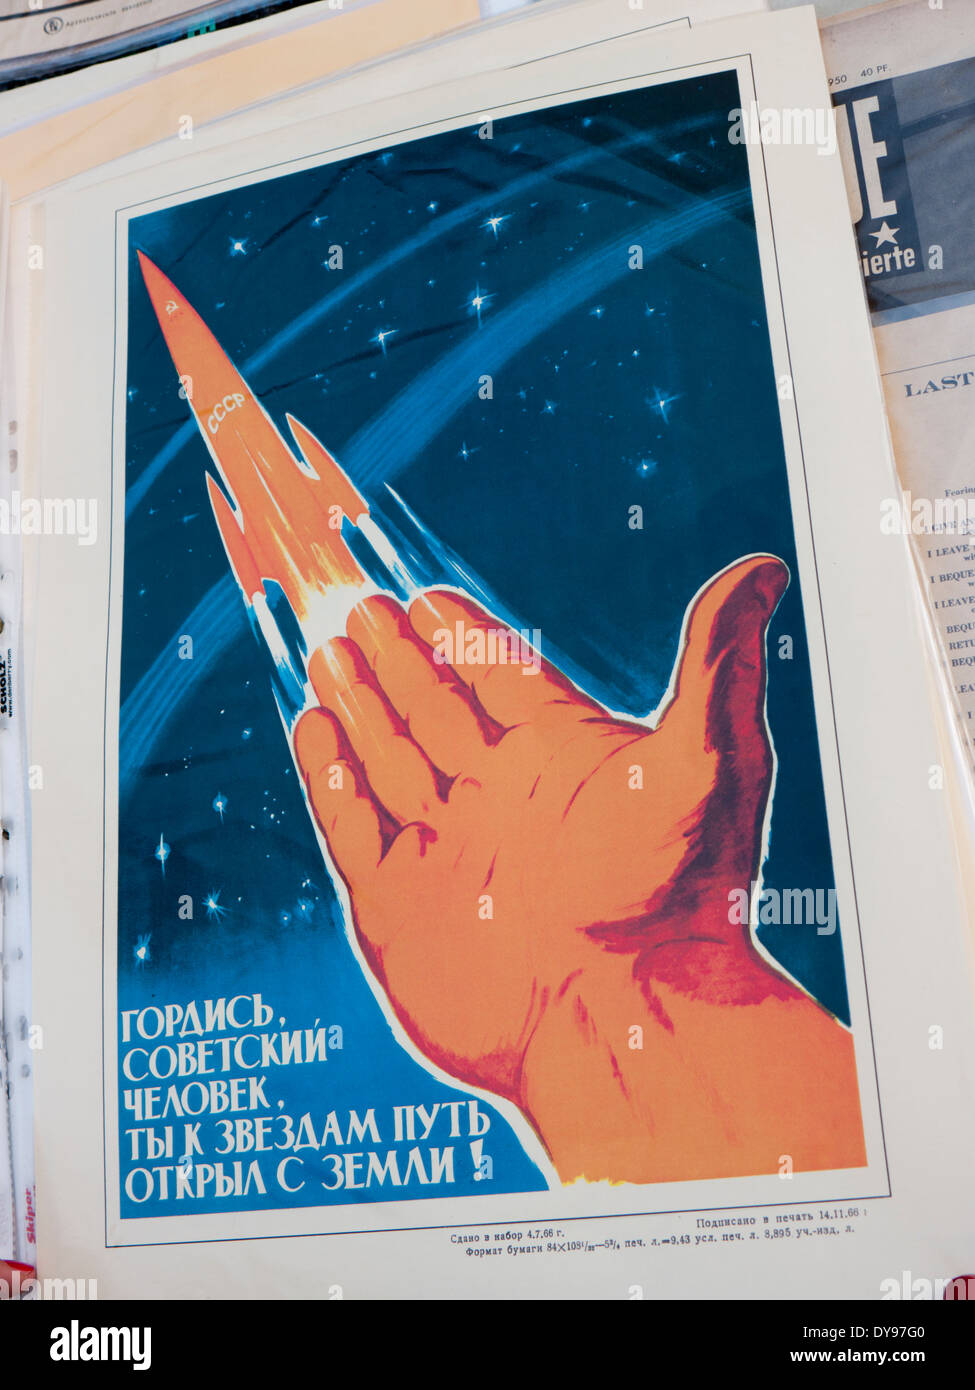 An old Russian propaganda poster promoting space race technology for sale at the flea market in Kiev Ukraine Stock Photo